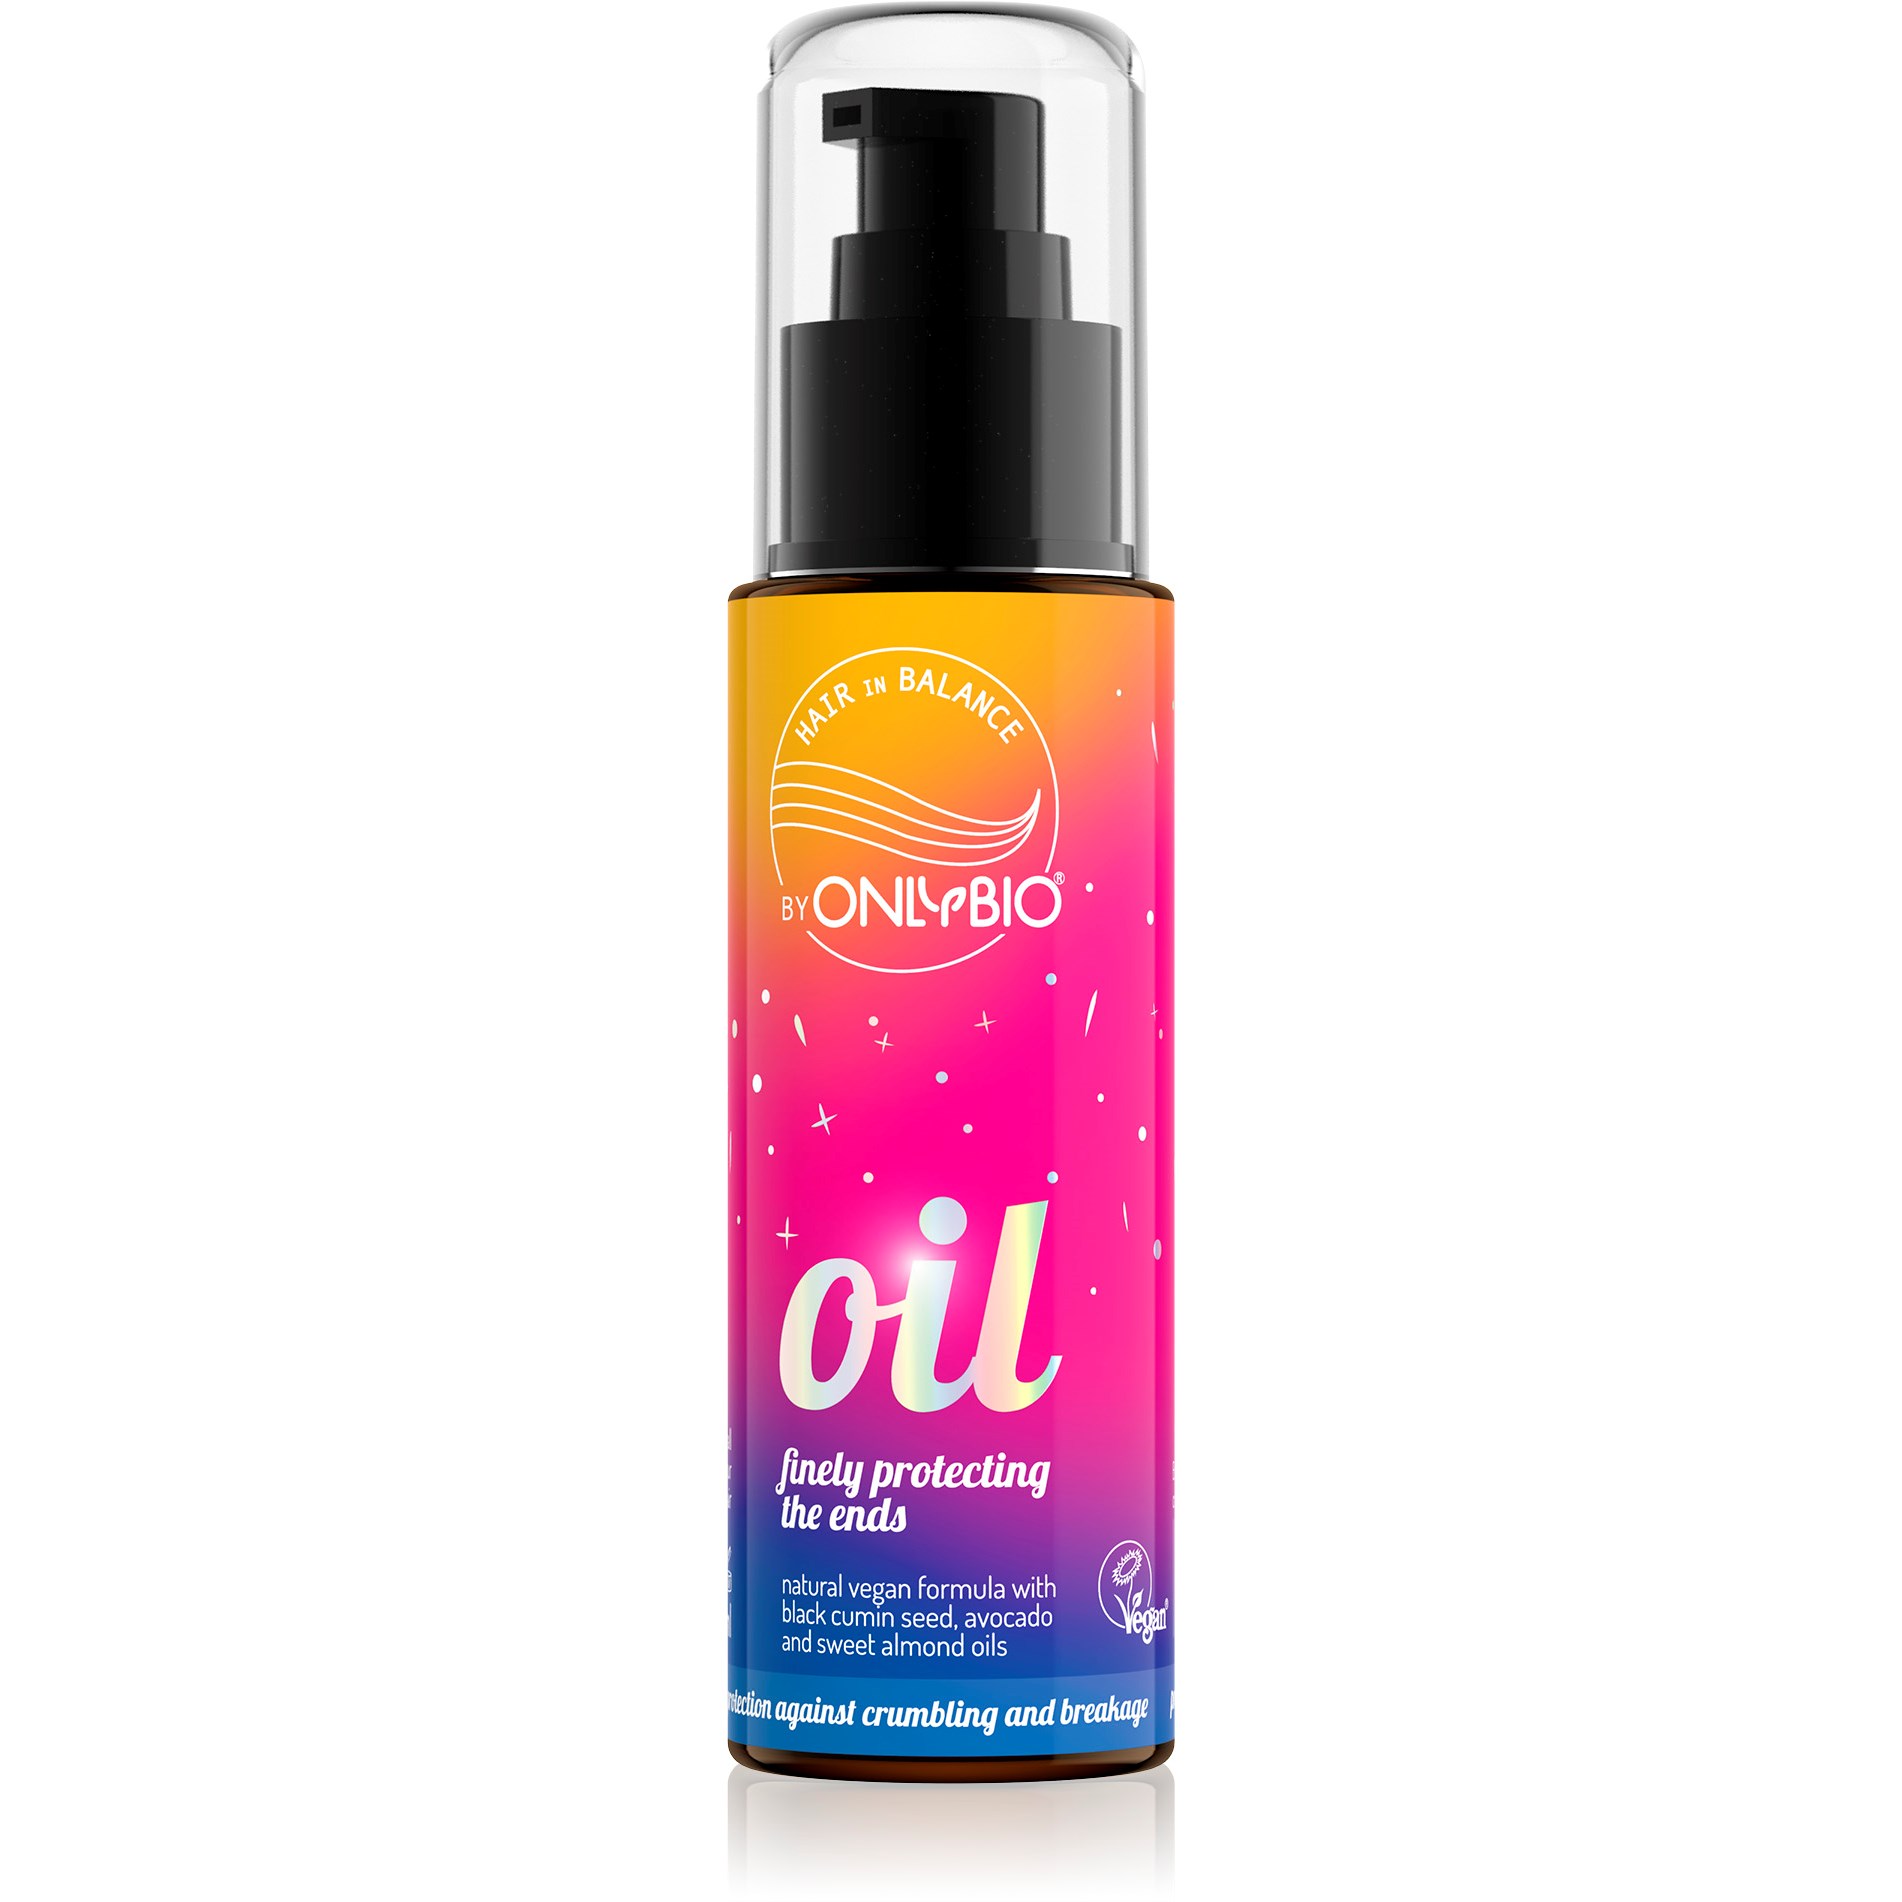 Hair in Balance by ONLYBIO Oil finely protecting the ends 80 ml